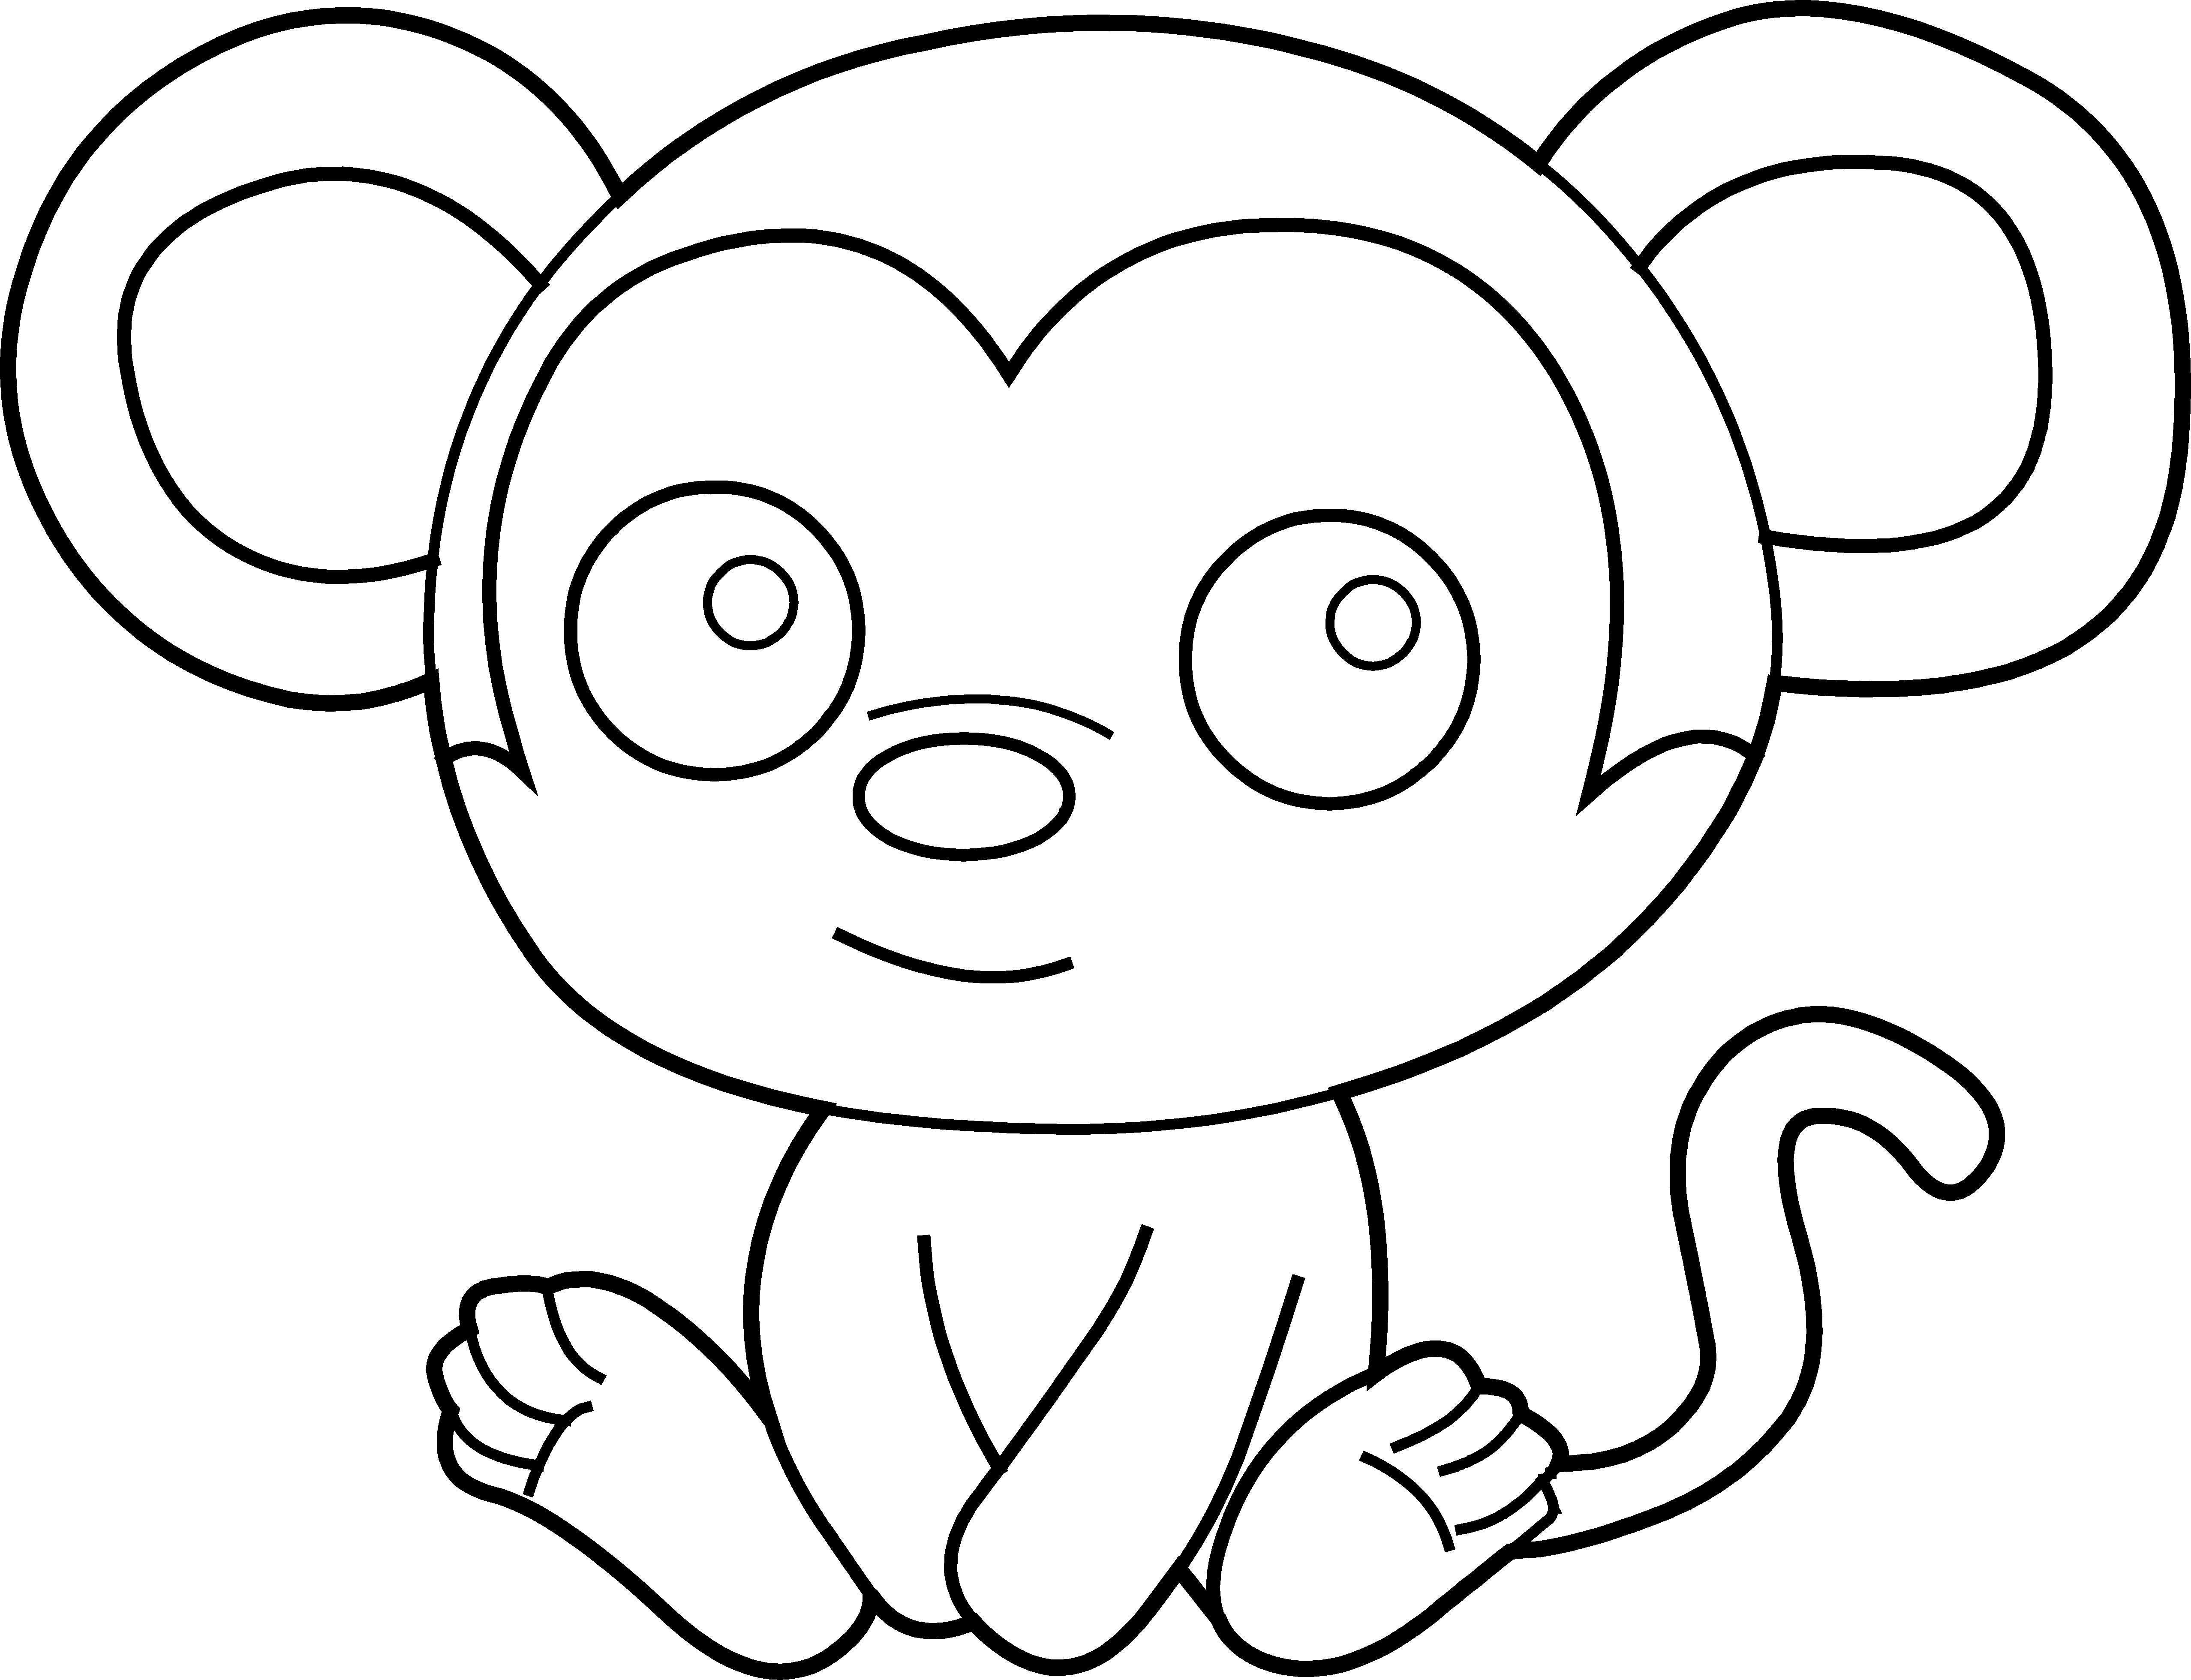 Free Black And White Cartoon Animals, Download Free Clip